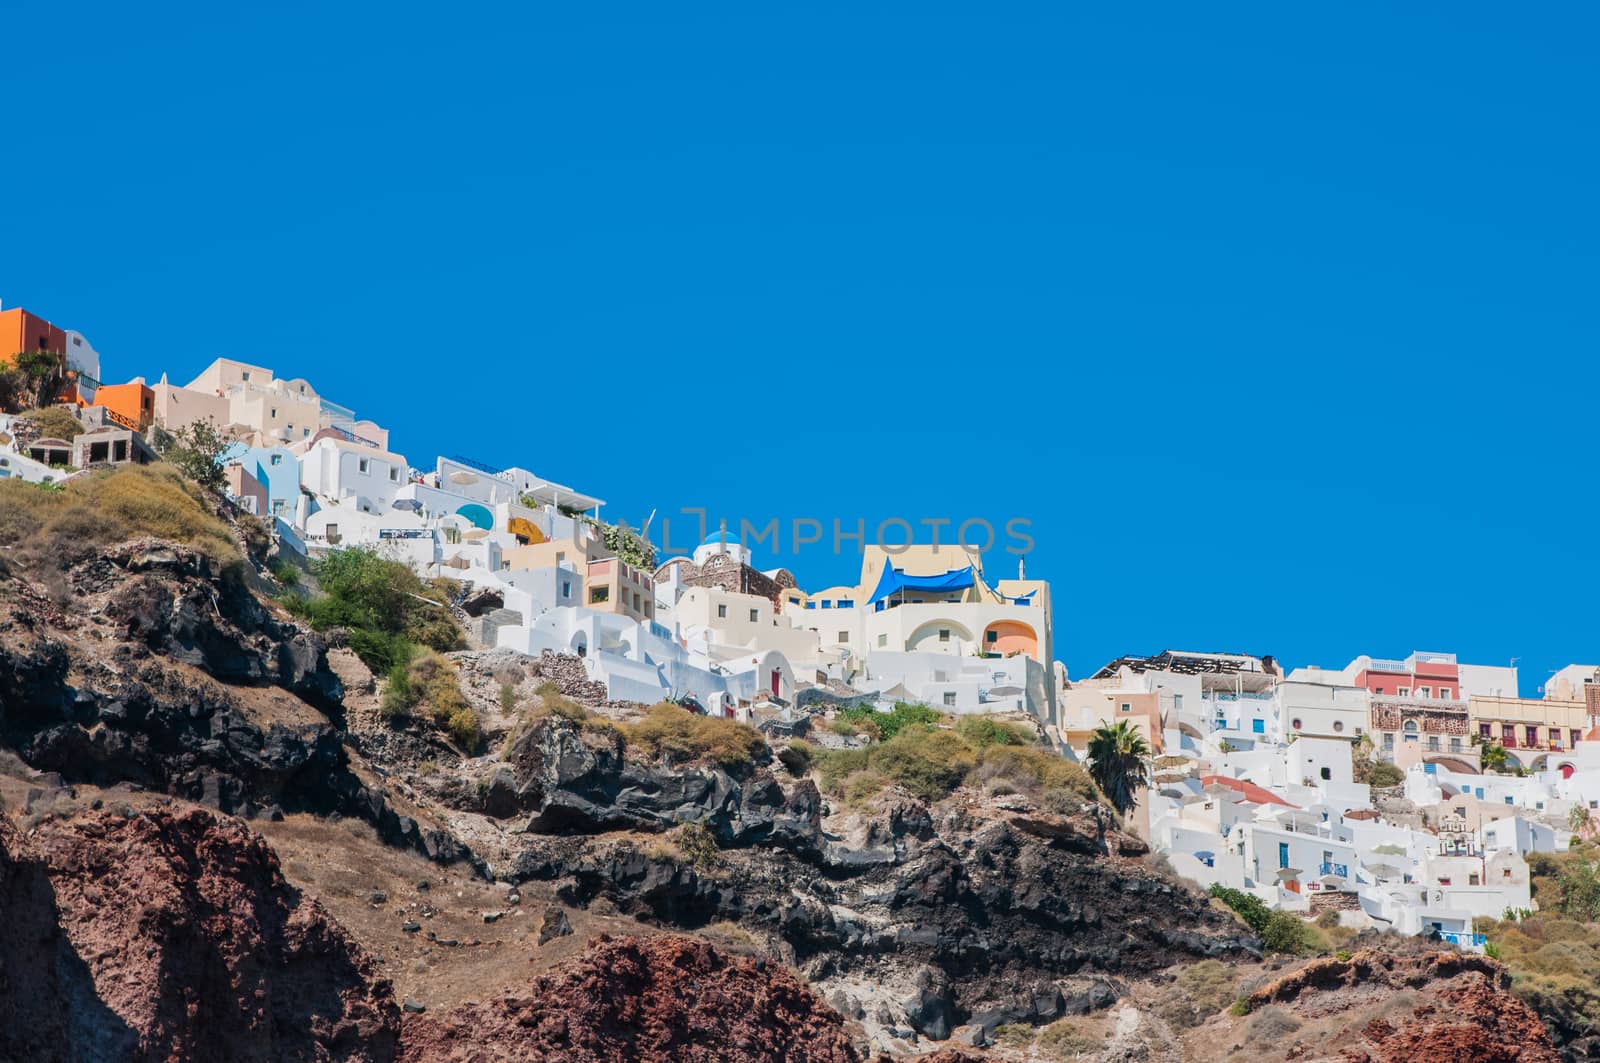 View of the Santorini village on the rock